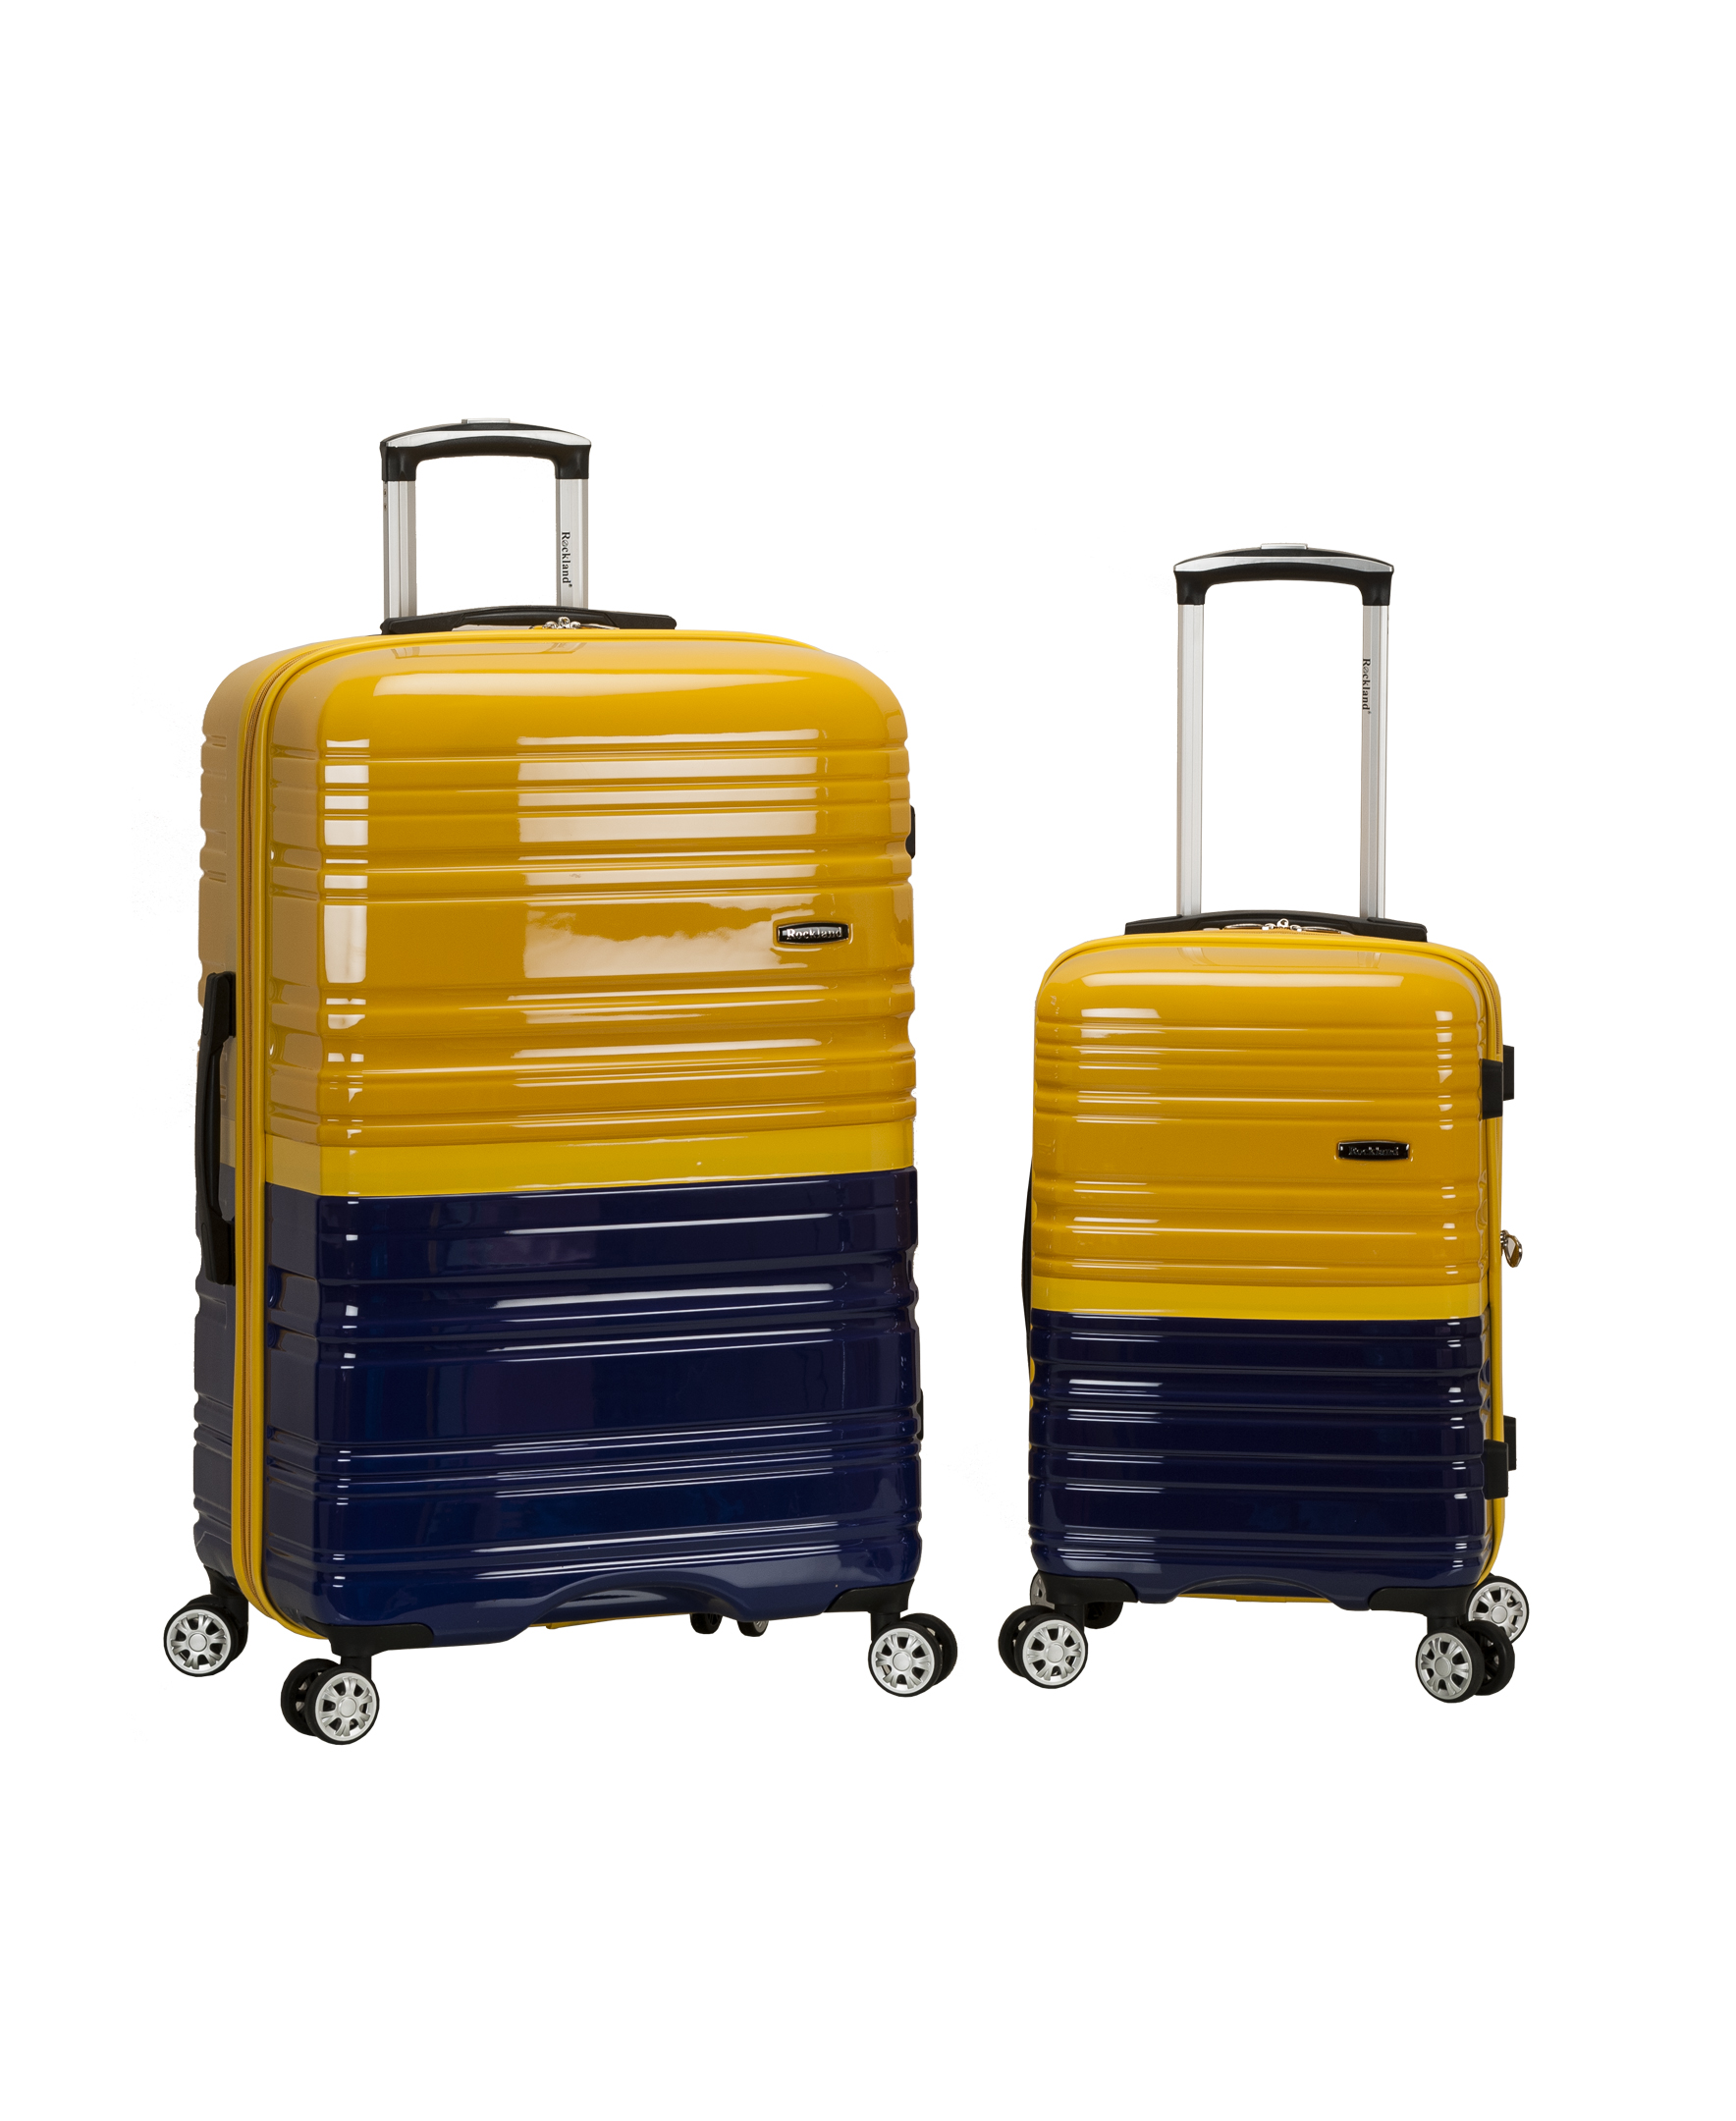 F225-2tonenavy Luggage Expandable Spinner Set, Navy & Yellow - 2 Piece